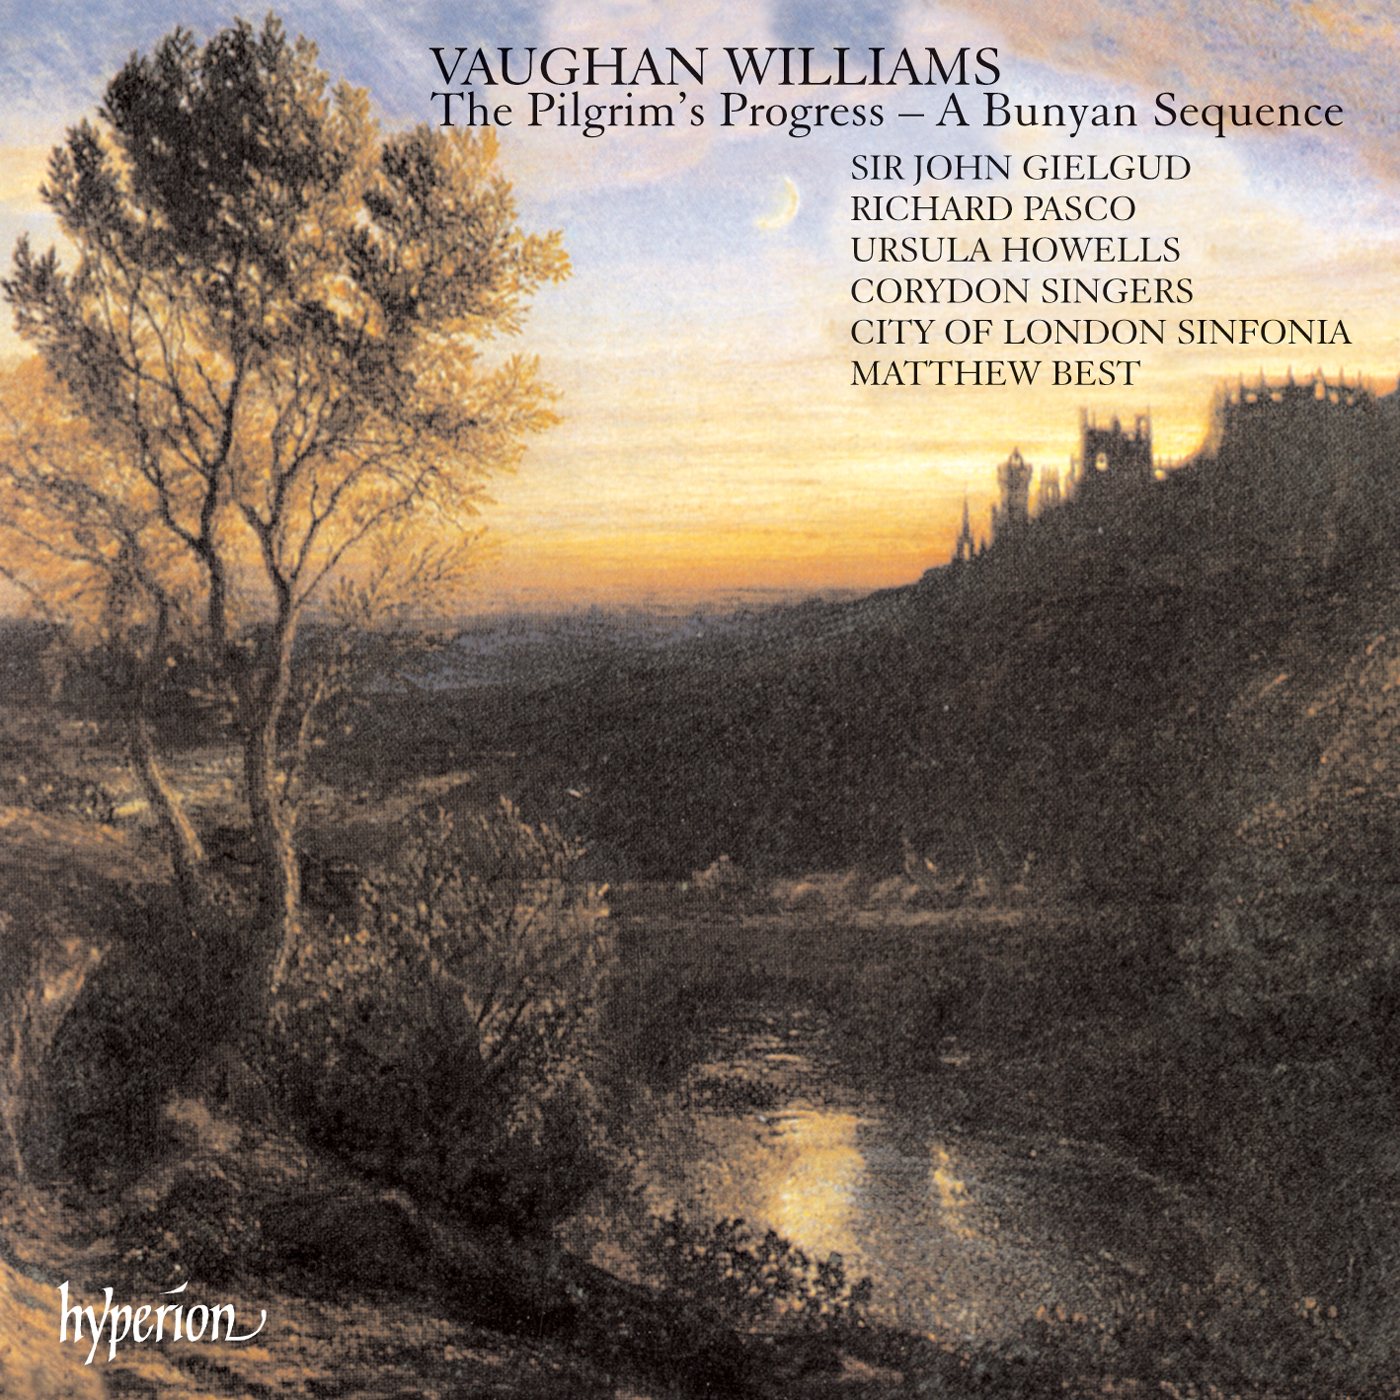 Vaughan Williams: The Pilgrim's Progress – A Bunyan Sequence for three speakers, treble solo, chorus and orchestra; text and music adapted by Christopher Palmer